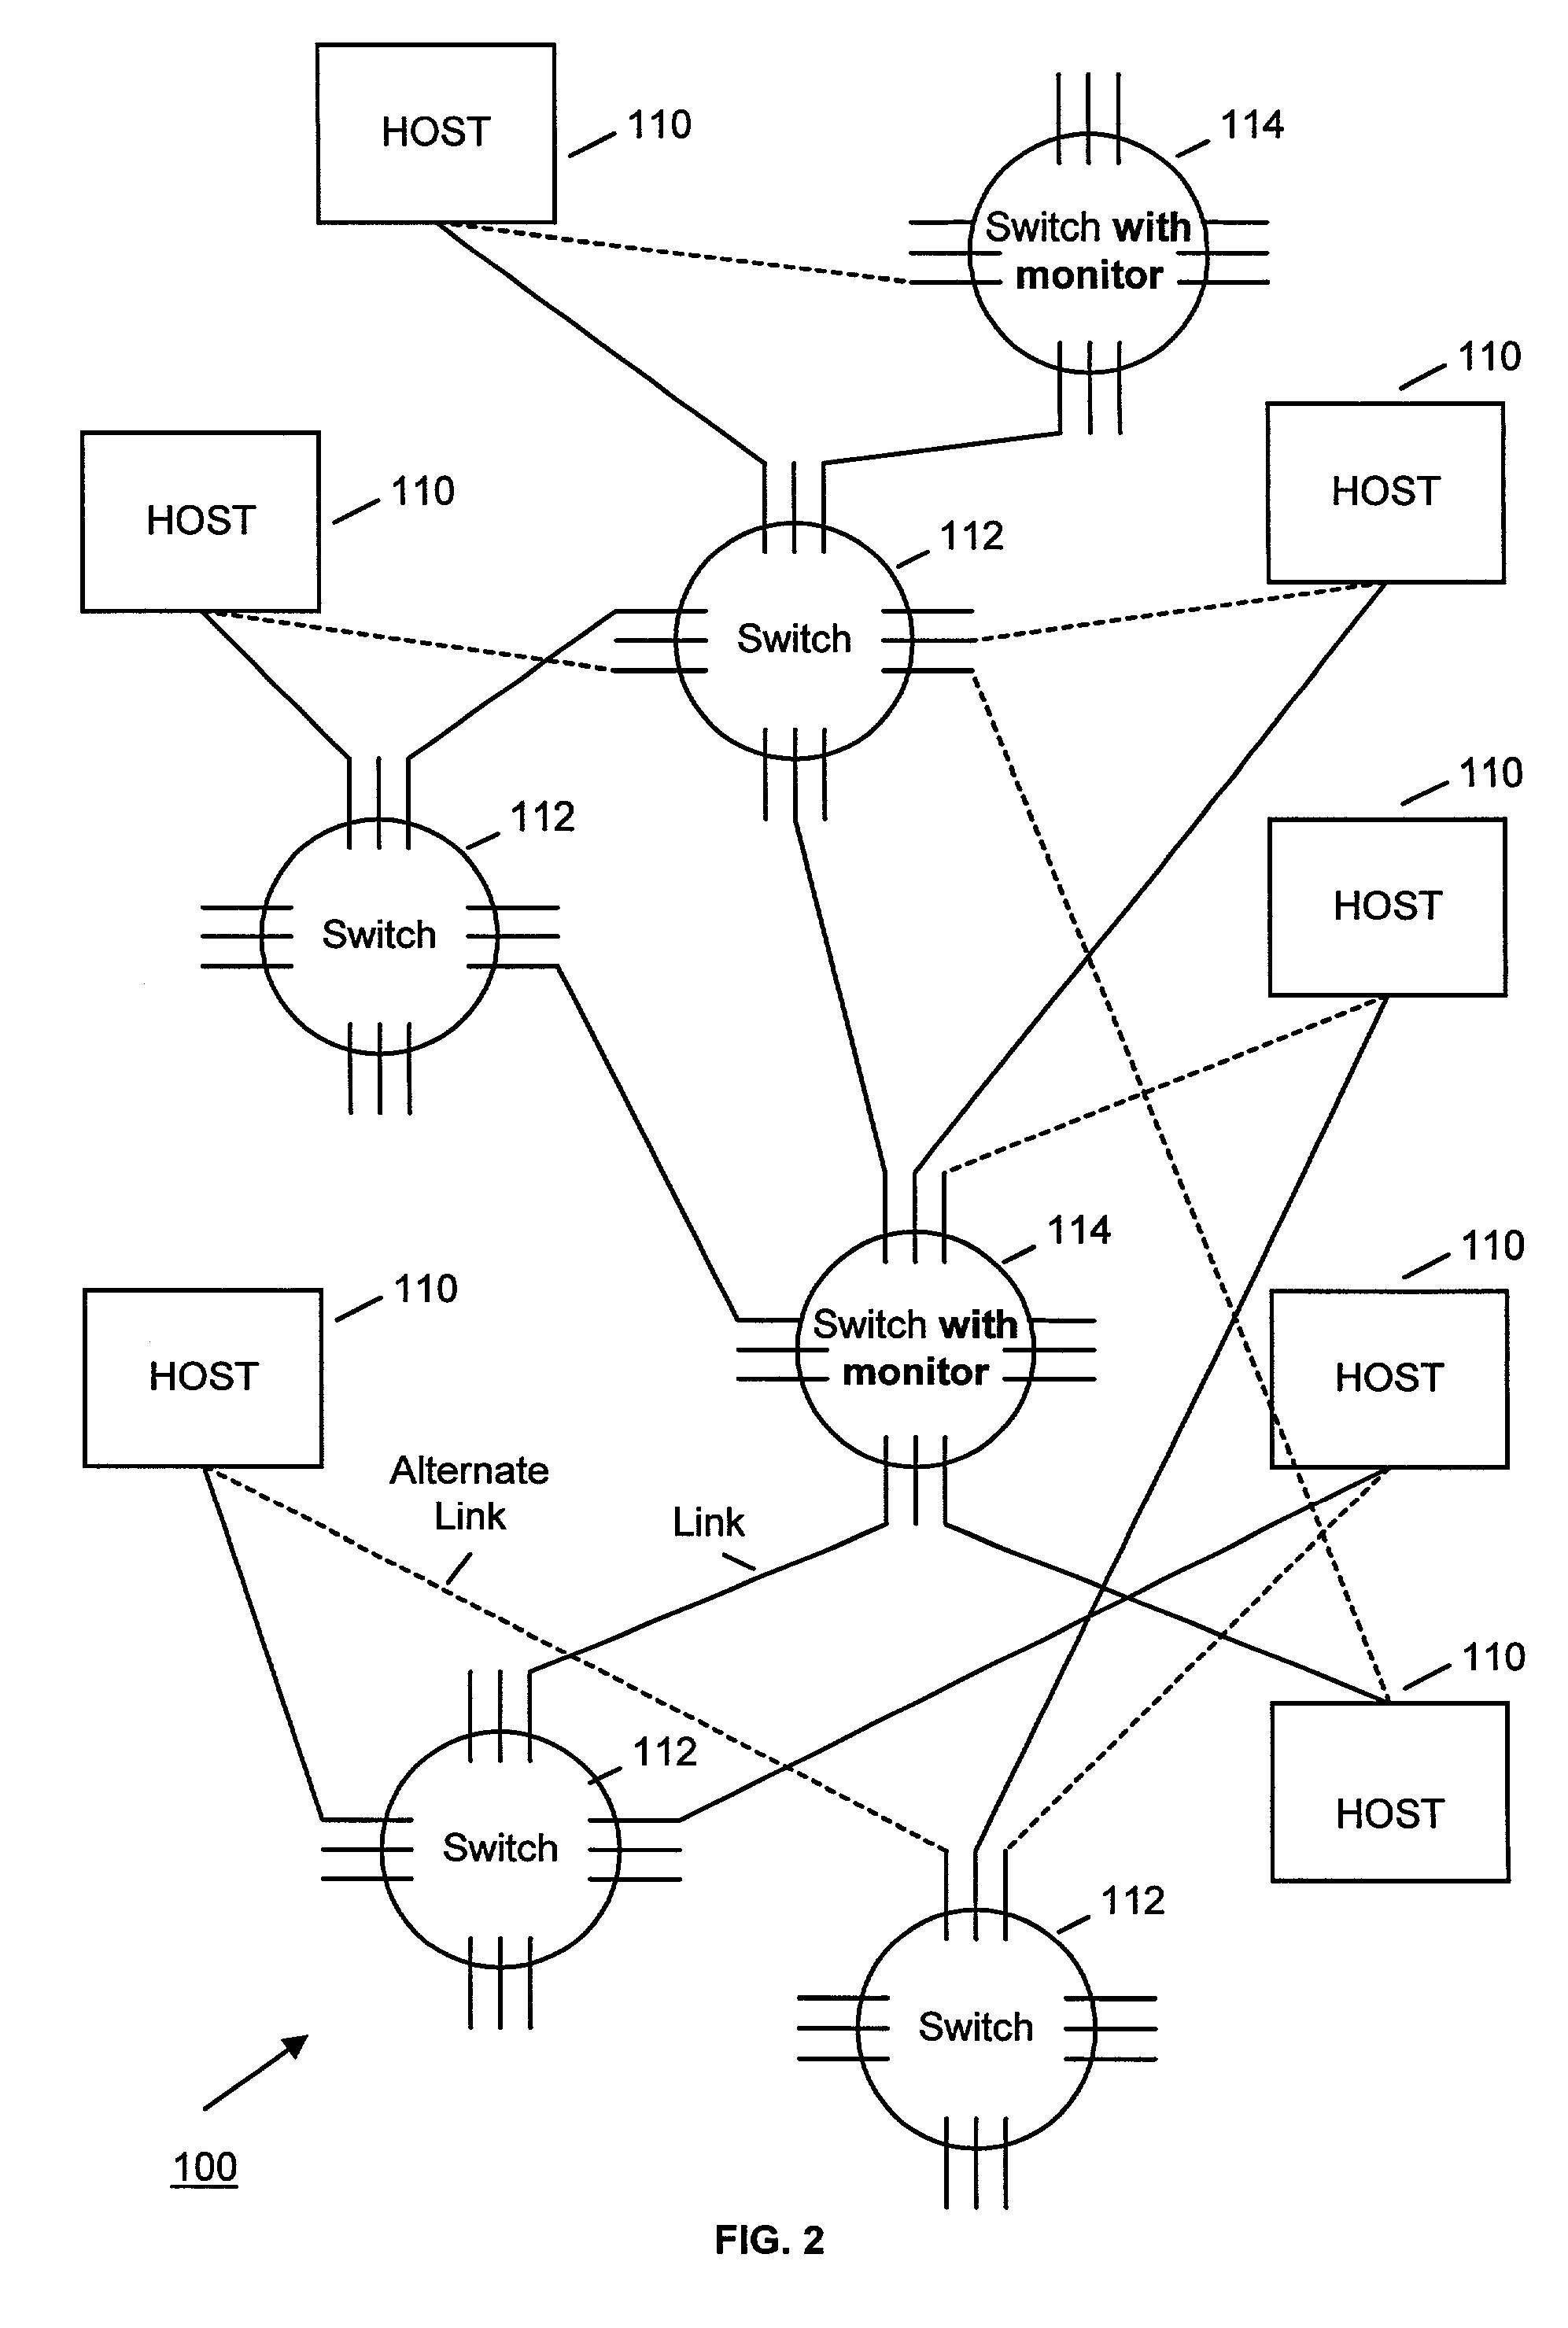 Method and system for limiting the impact of undesirable behavior of computers on a shared data network